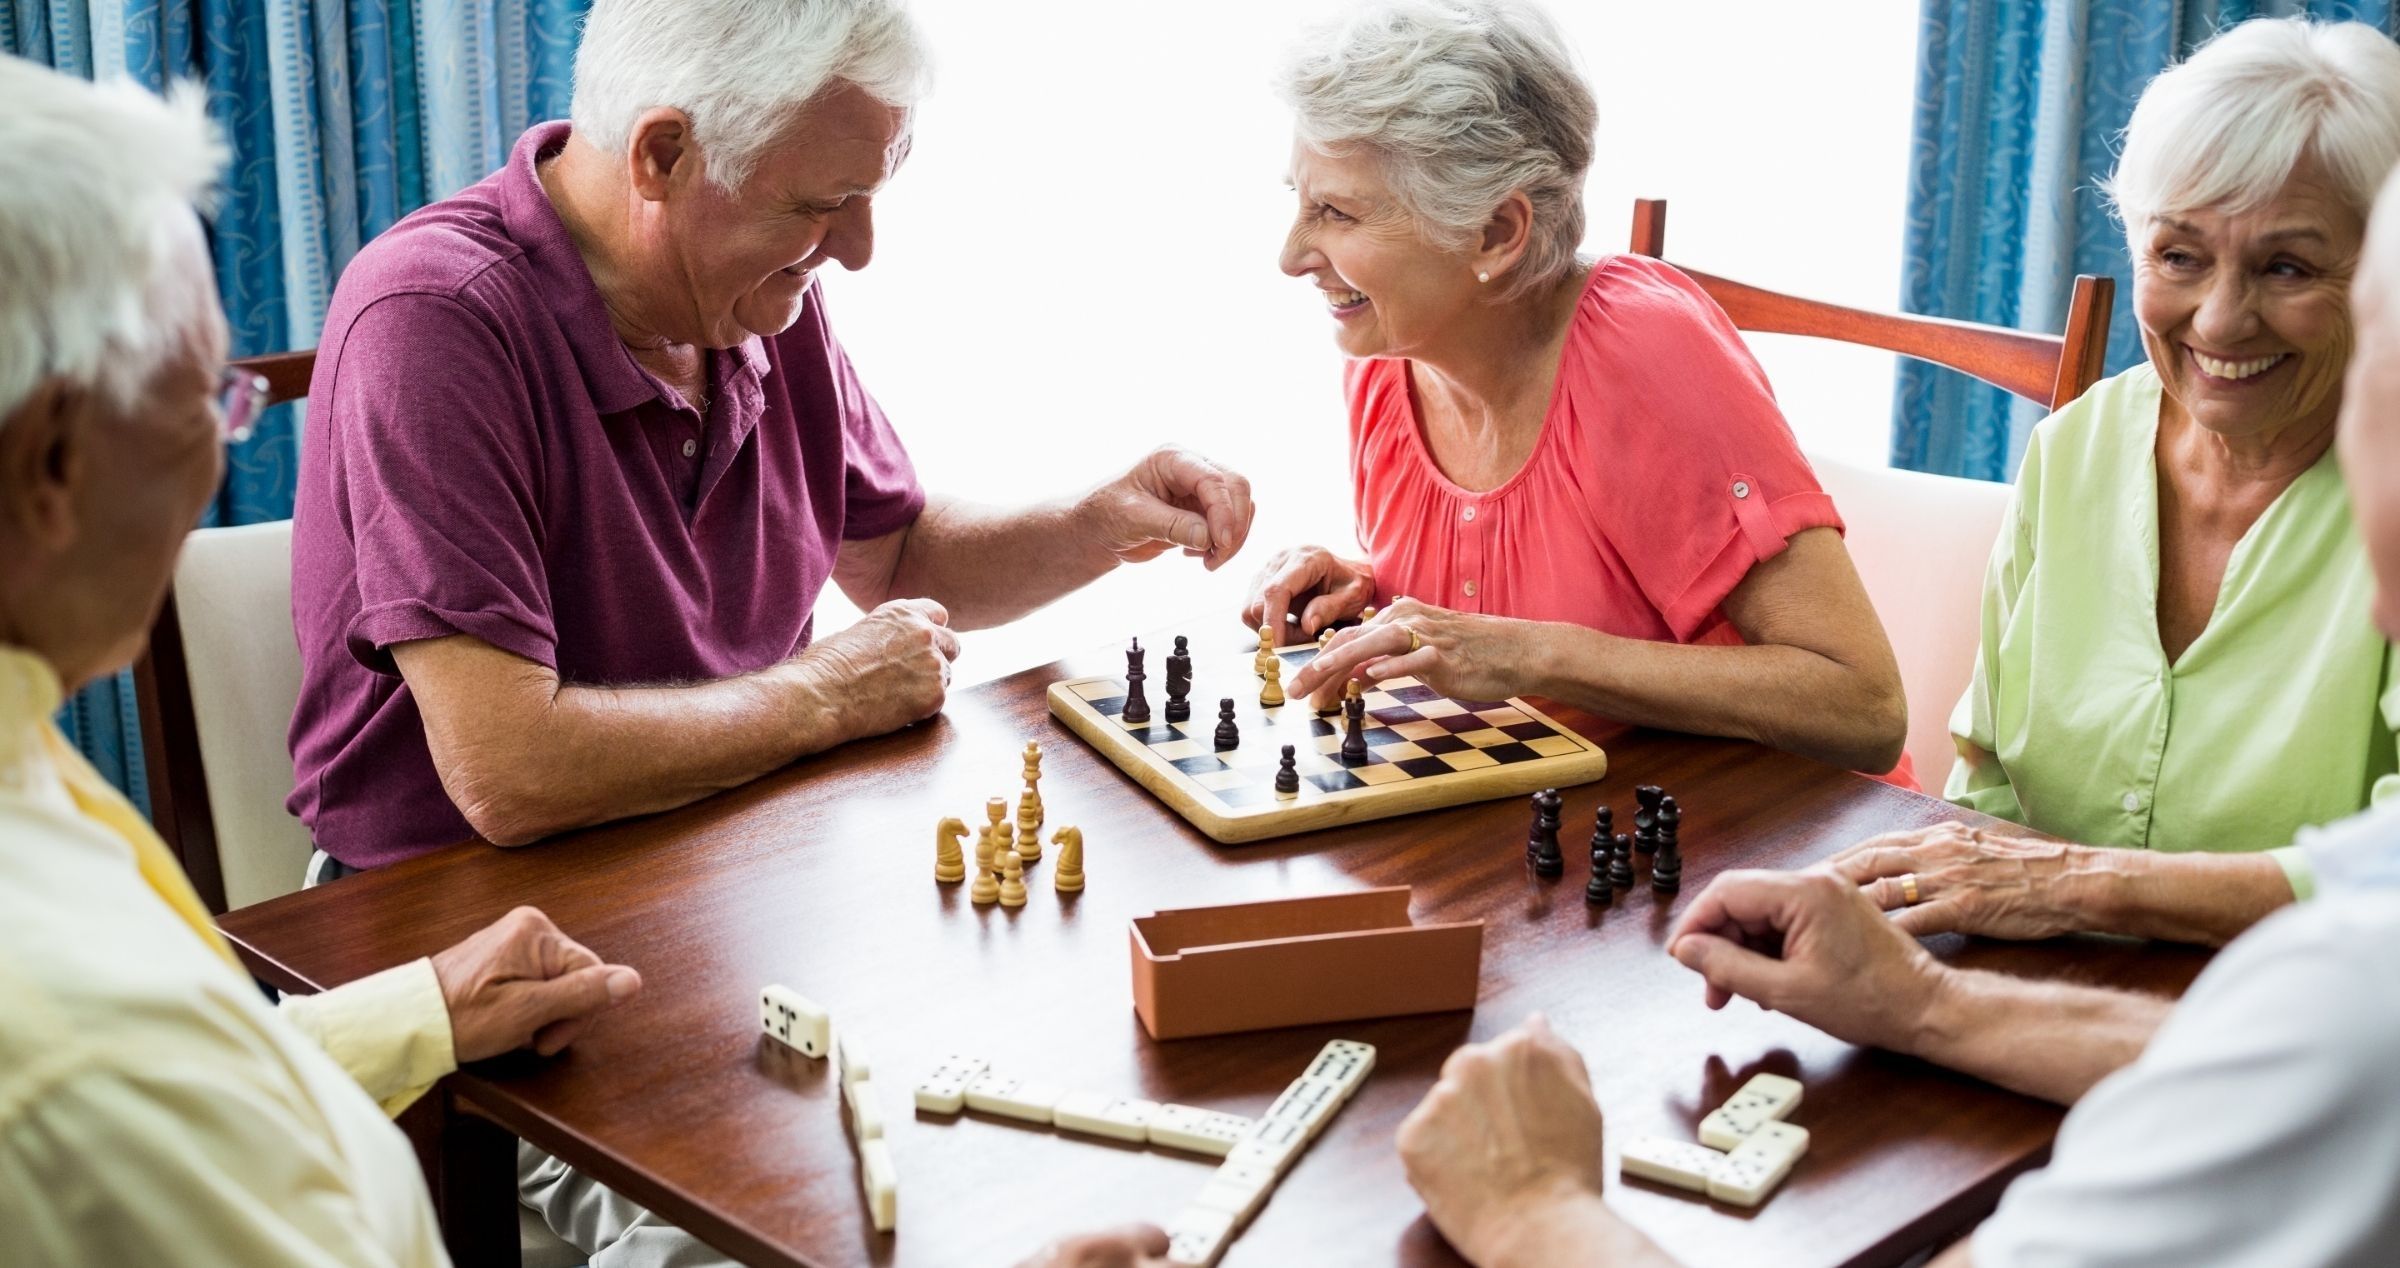 Group of retirees happily enjoying board games and conversation